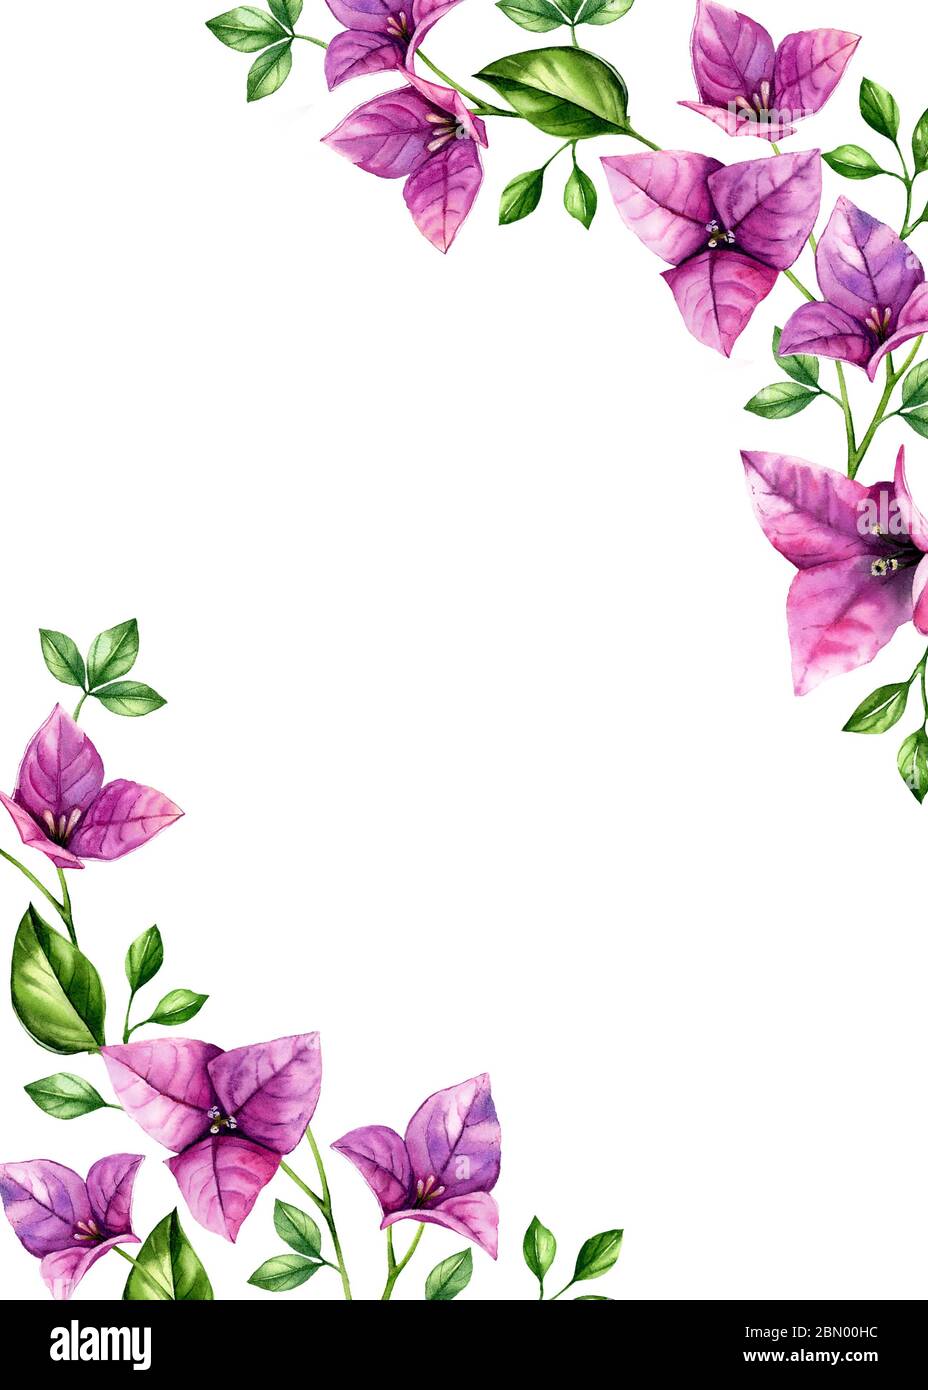 Watercolor floral background. Vertical A5 card template and place for text. Purple bougainvillea flowers in corners. Tropical botanical illustrations Stock Photo